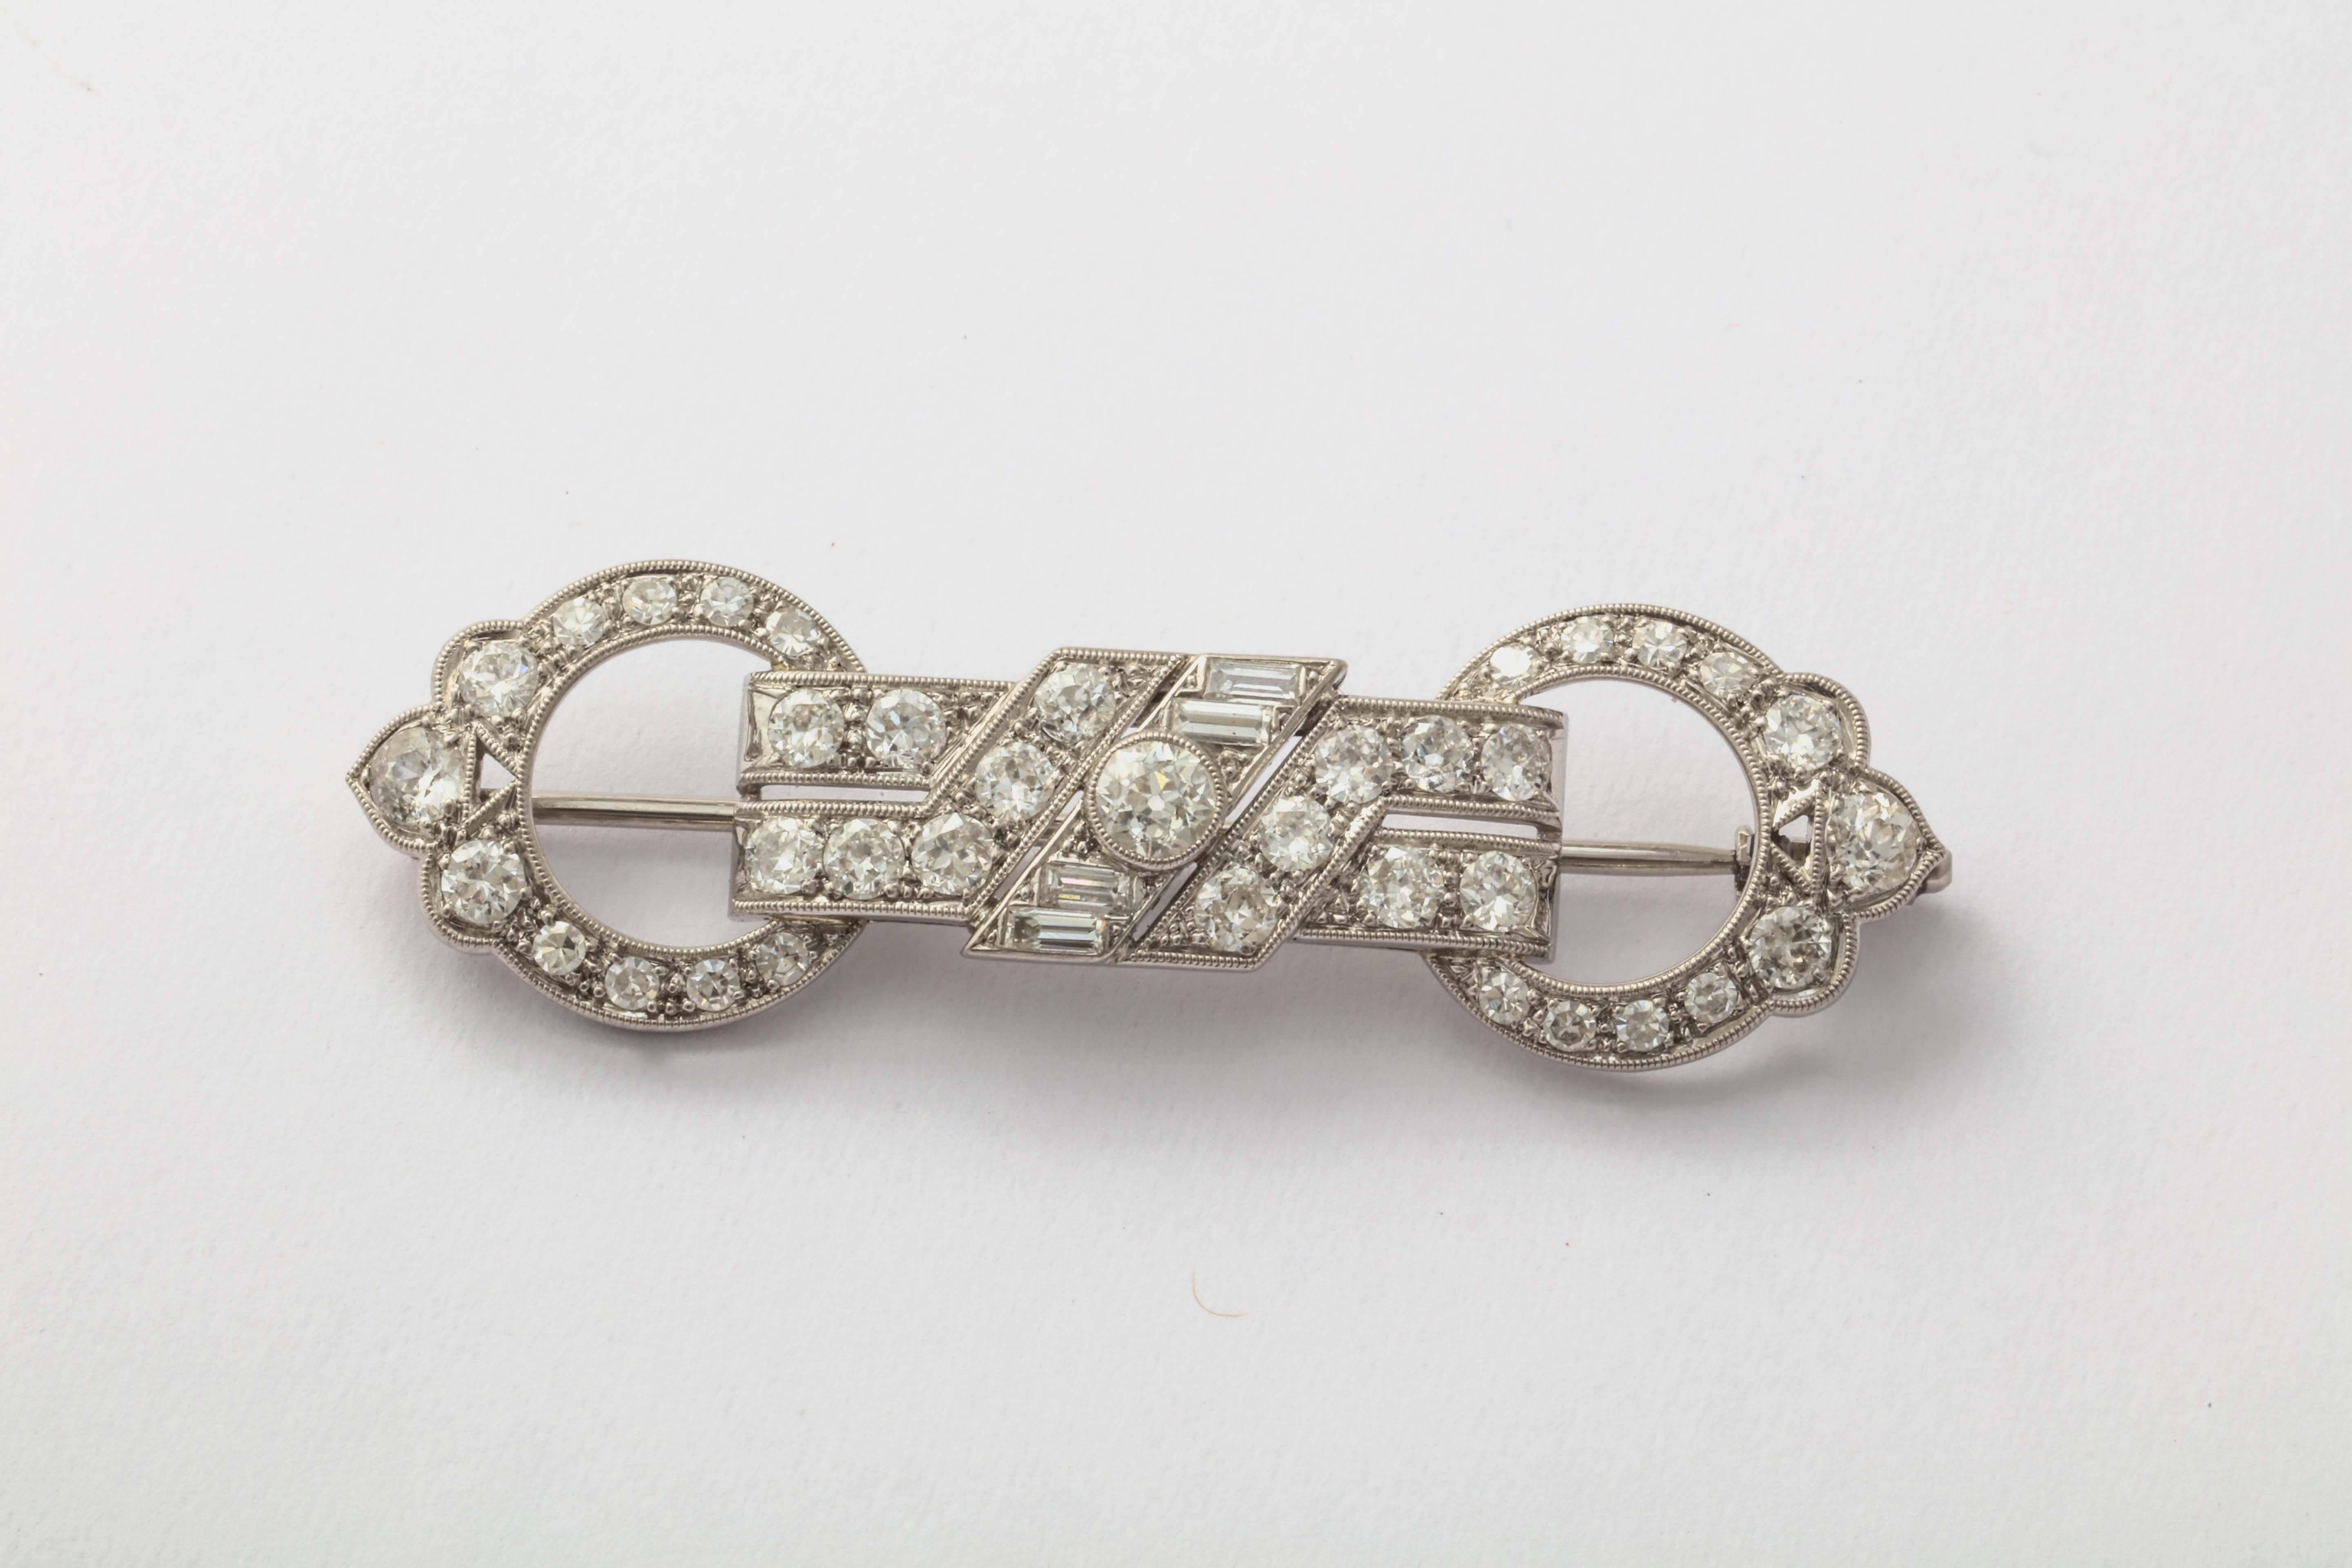 Platinum brooch with lovely openwork and milgraining. It is set with 37 Old European cut diamonds ranging in size from .05-.25cts and 4 baguette diamonds. 